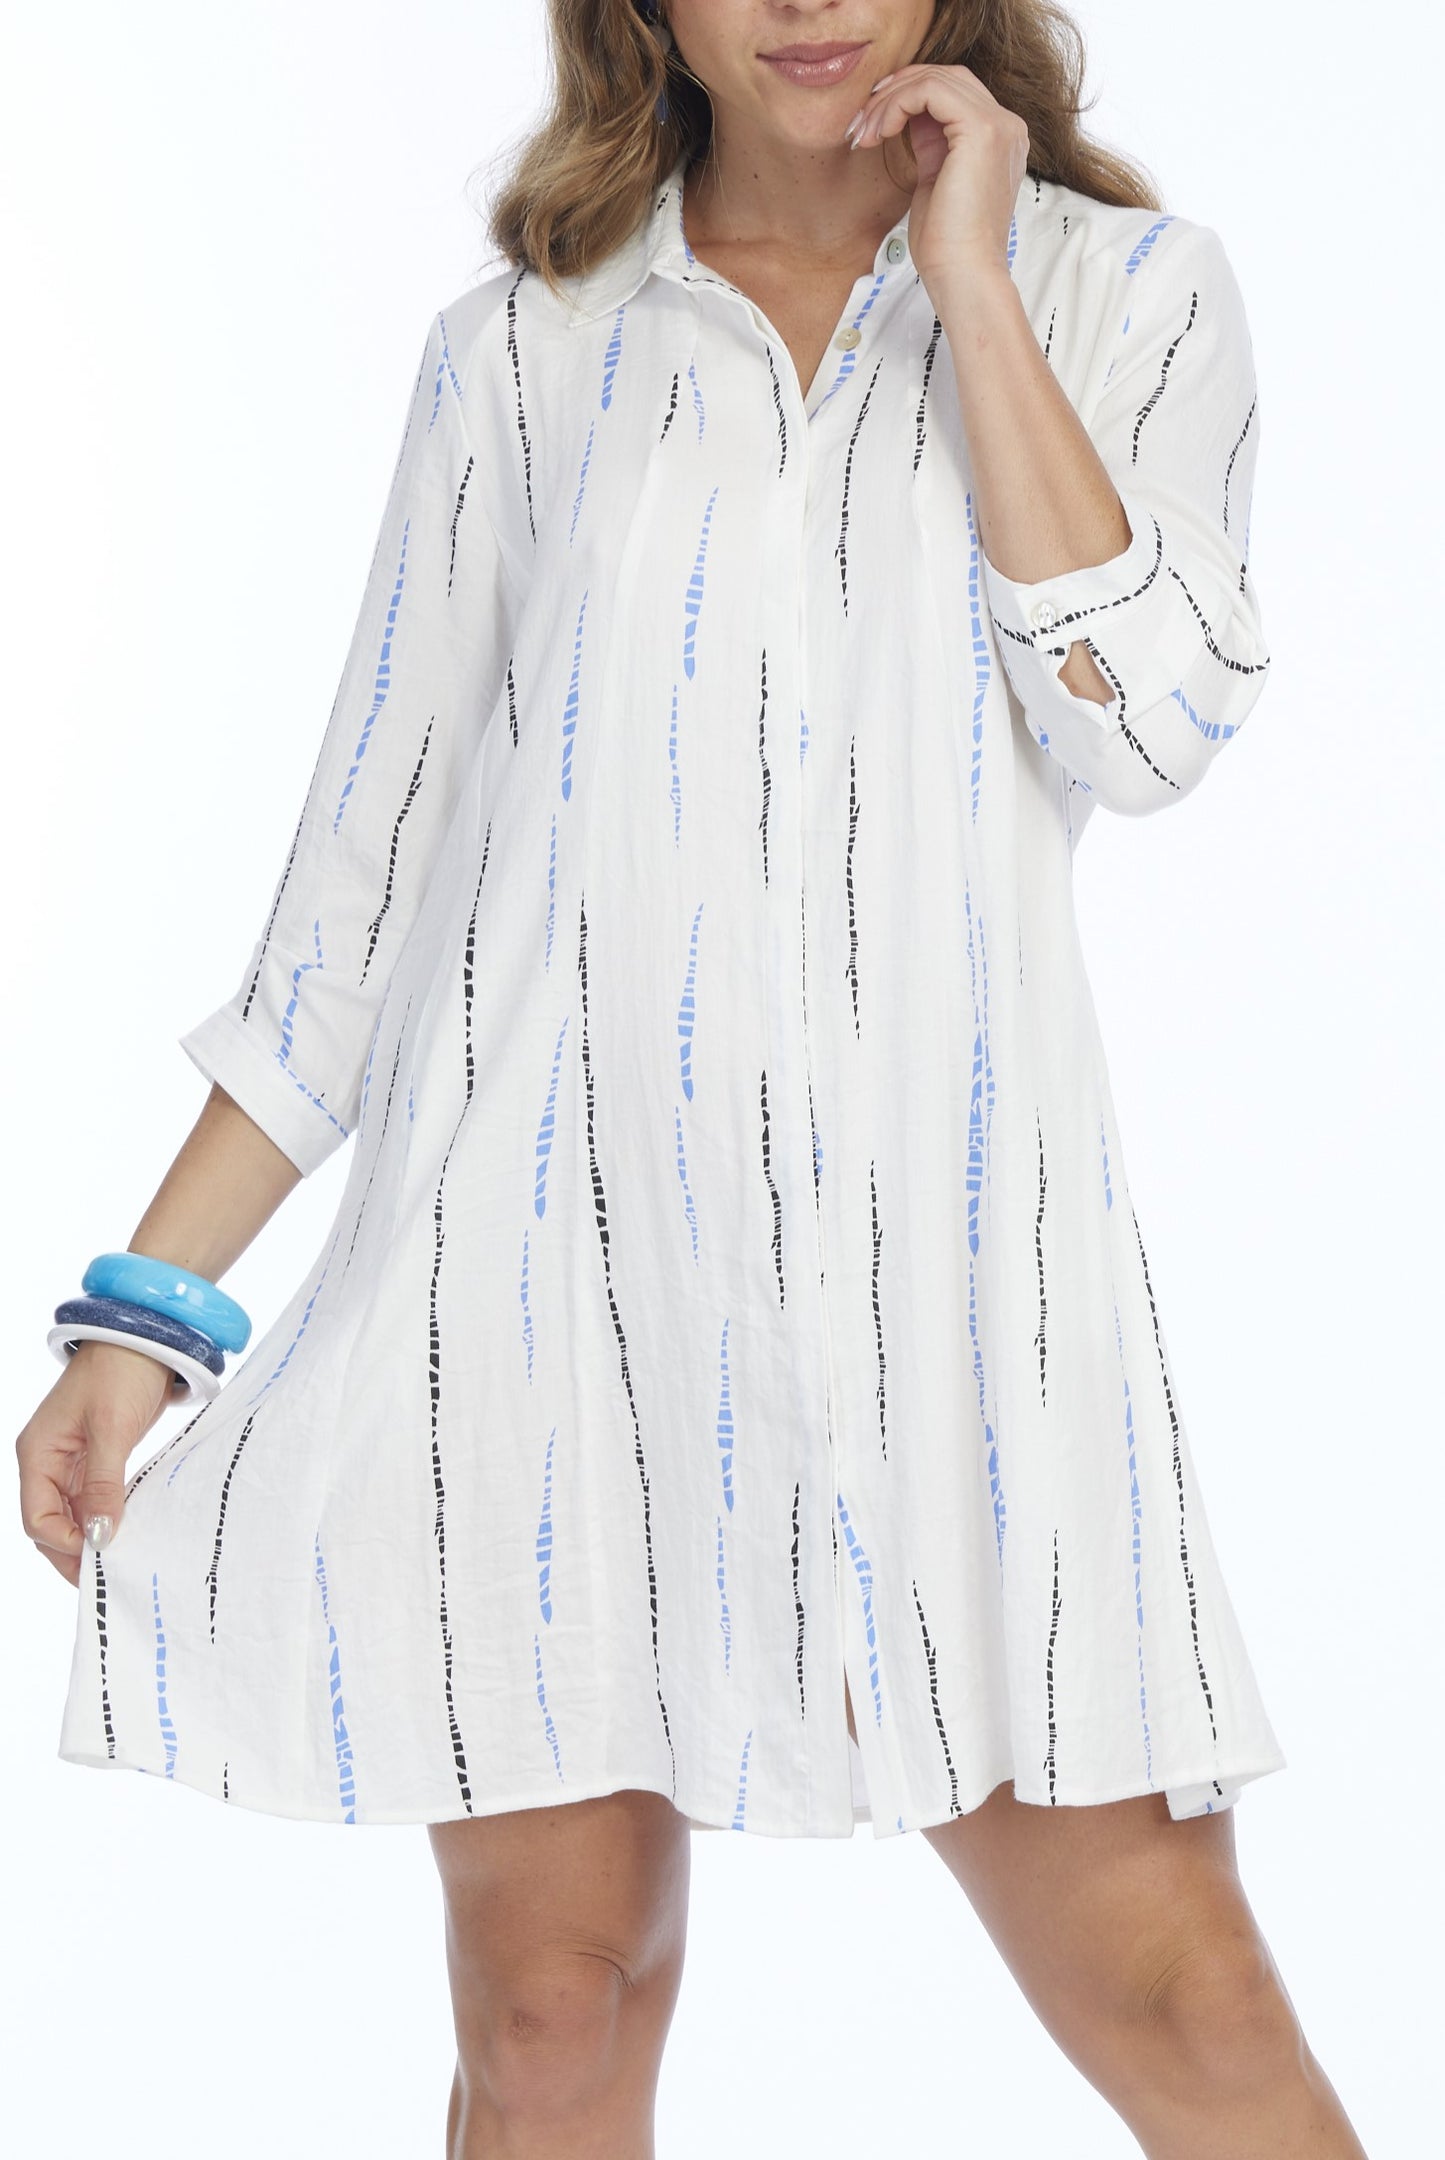 Loose Fitting Women's White Shirt Dress With Collar 3/4 Sleeves | Haven  LIOR